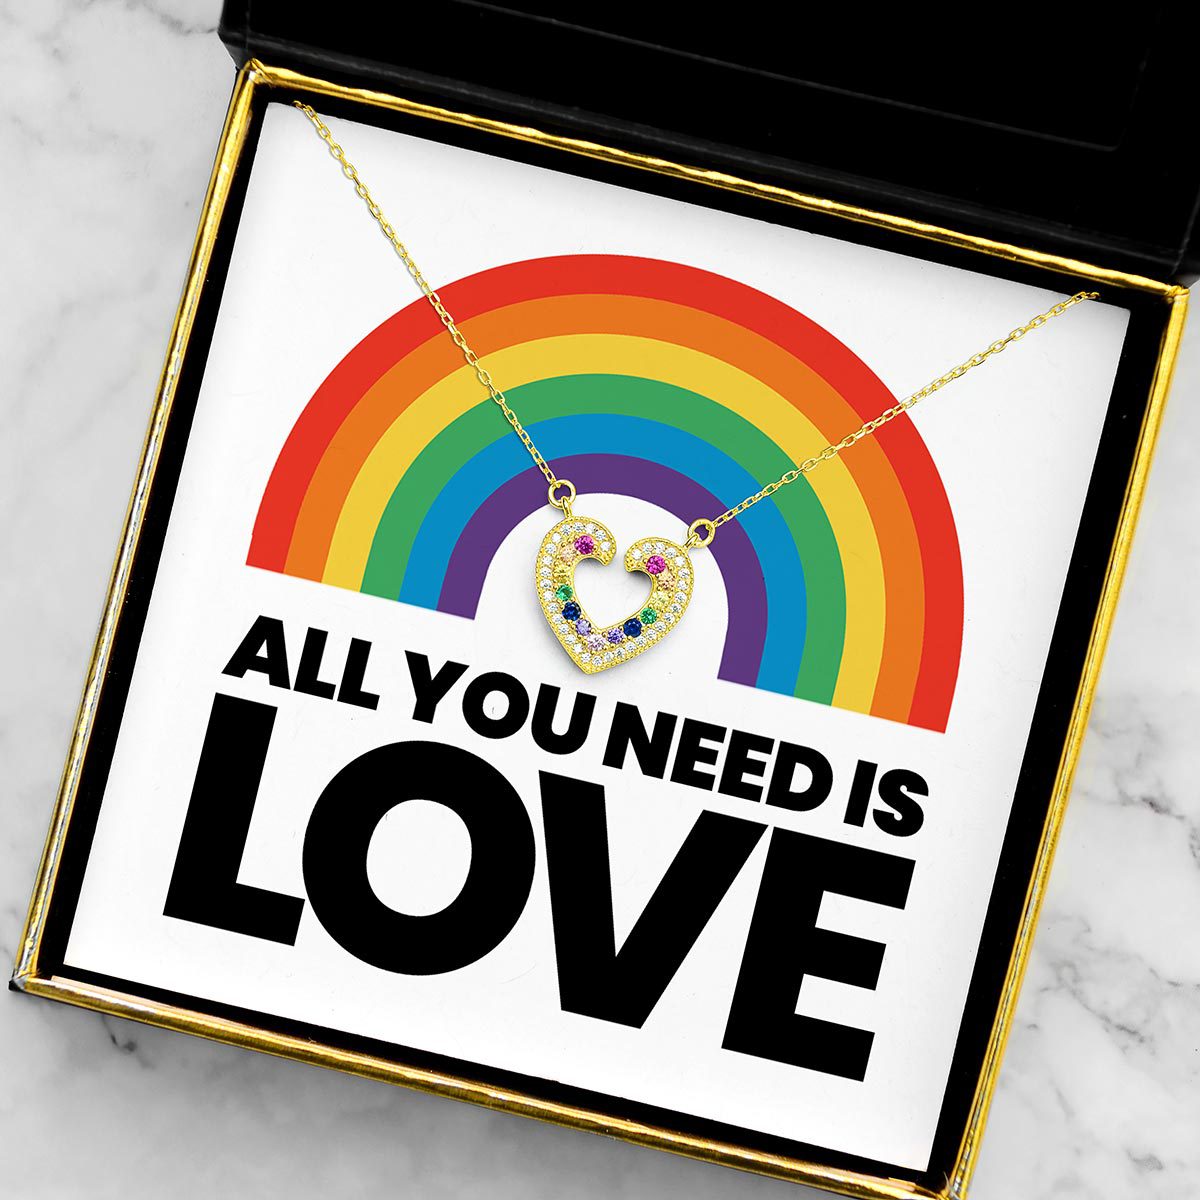 All You Need Is Love - Rainbow Open Heart Necklace Gift Set